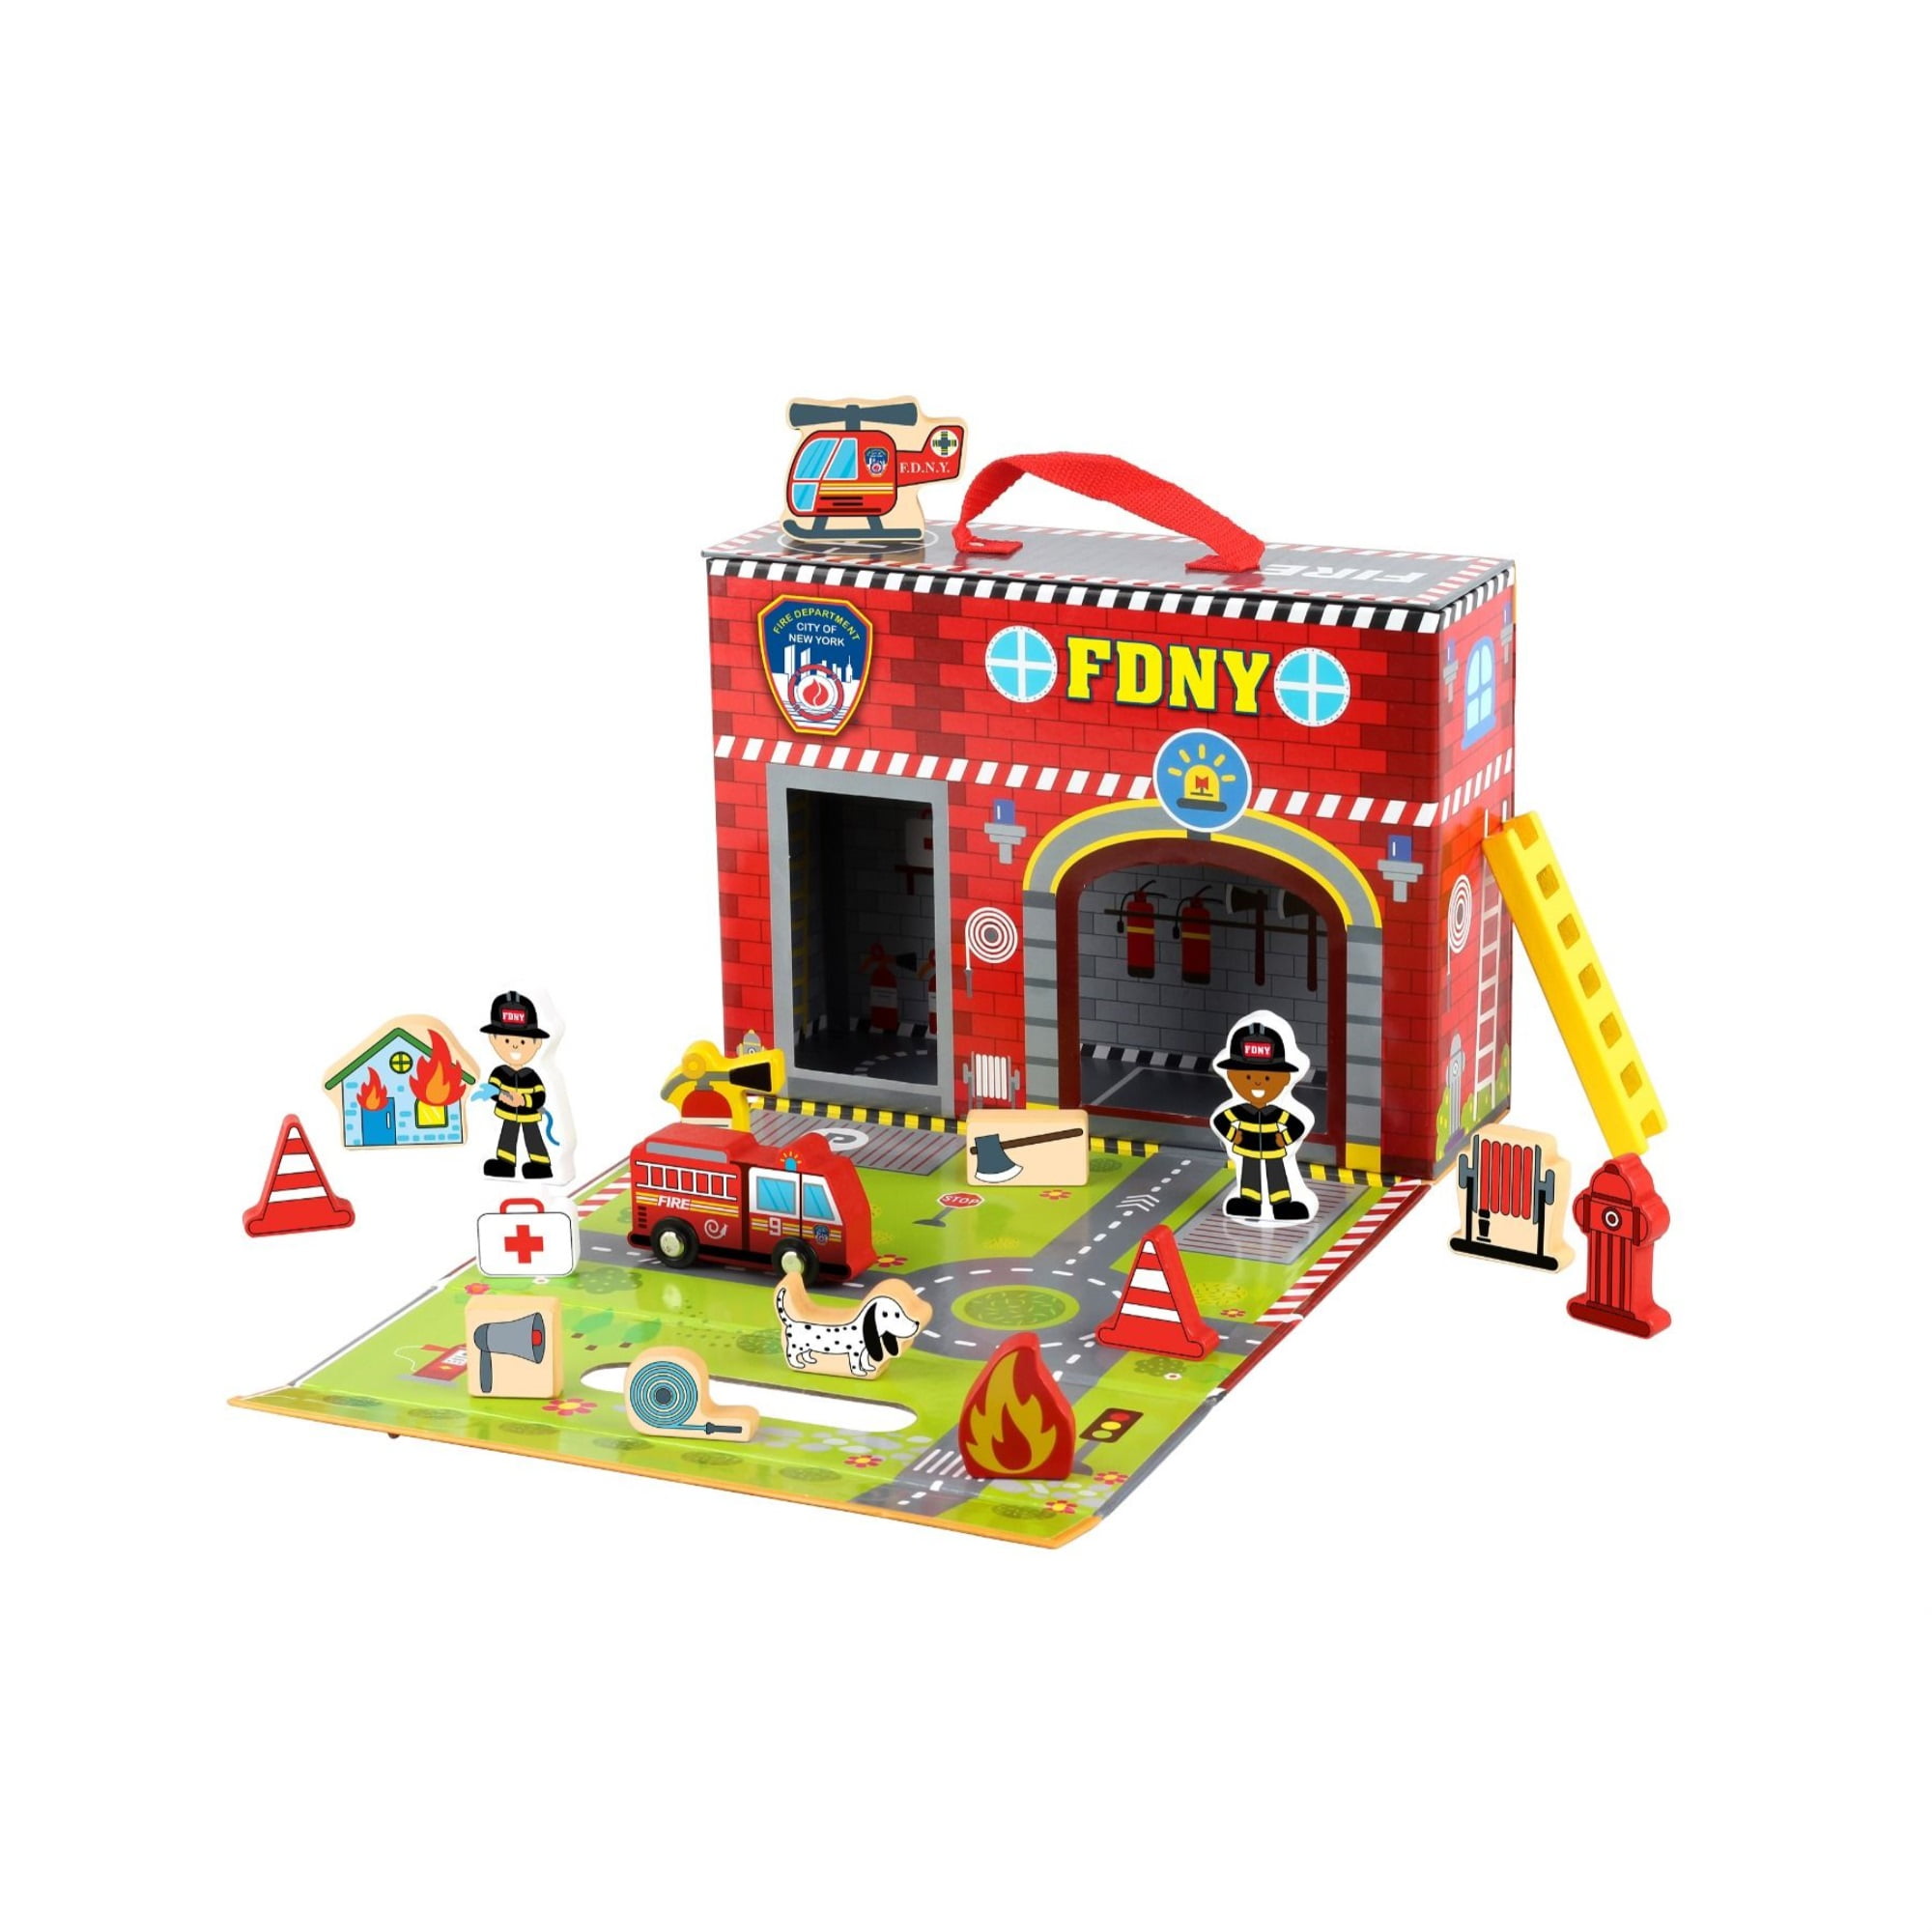 Picture of Daron TY87203 Fdny Fire Station Carring Case with 18 Wooden Accessories